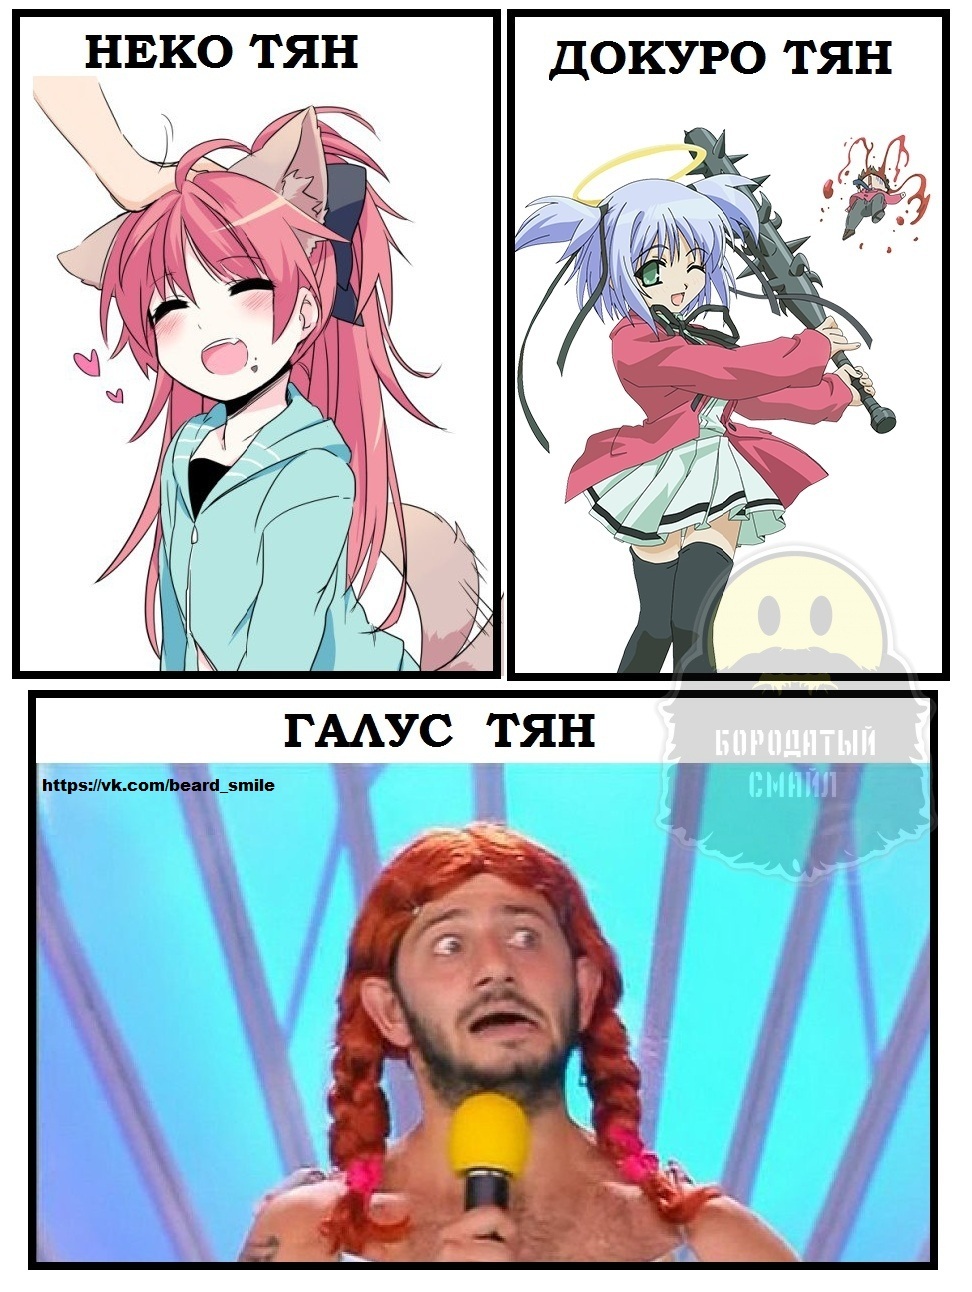 For anime fans: Varieties of Tyanok (post stolen from a small author's public VK) - Galustyan, Anime, Anime girls, , Girls, Not anime, Mikhail Galustyan